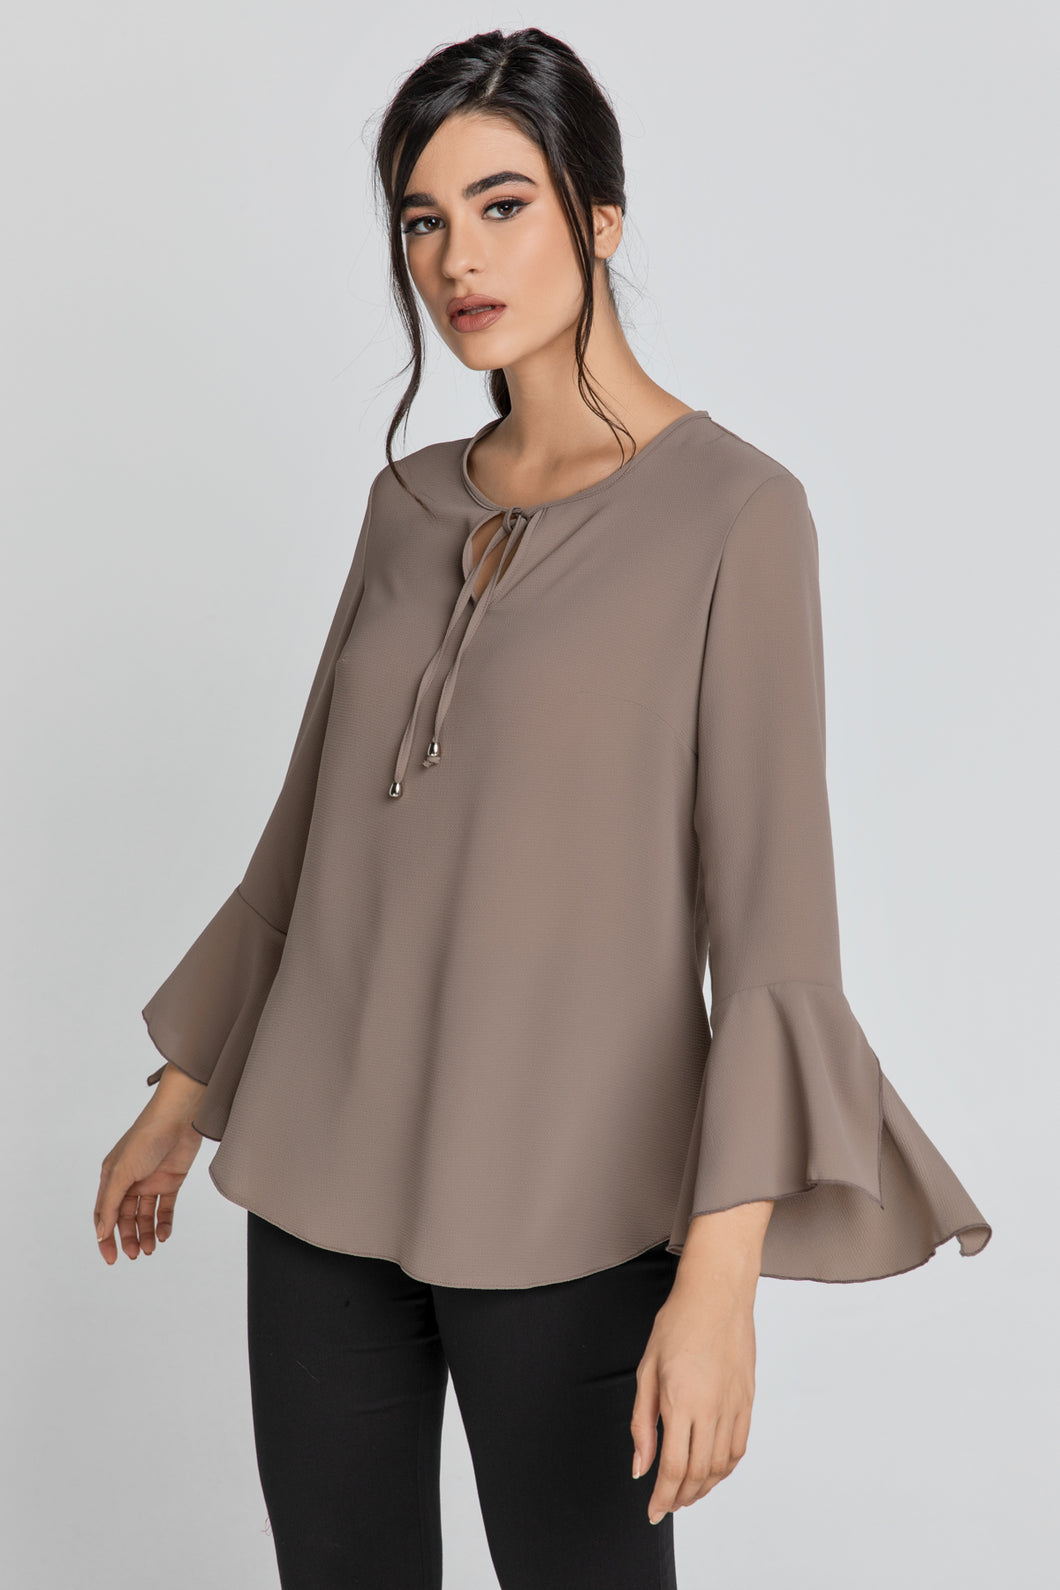 Iron Brown Flounce Sleeve Top by Conquista